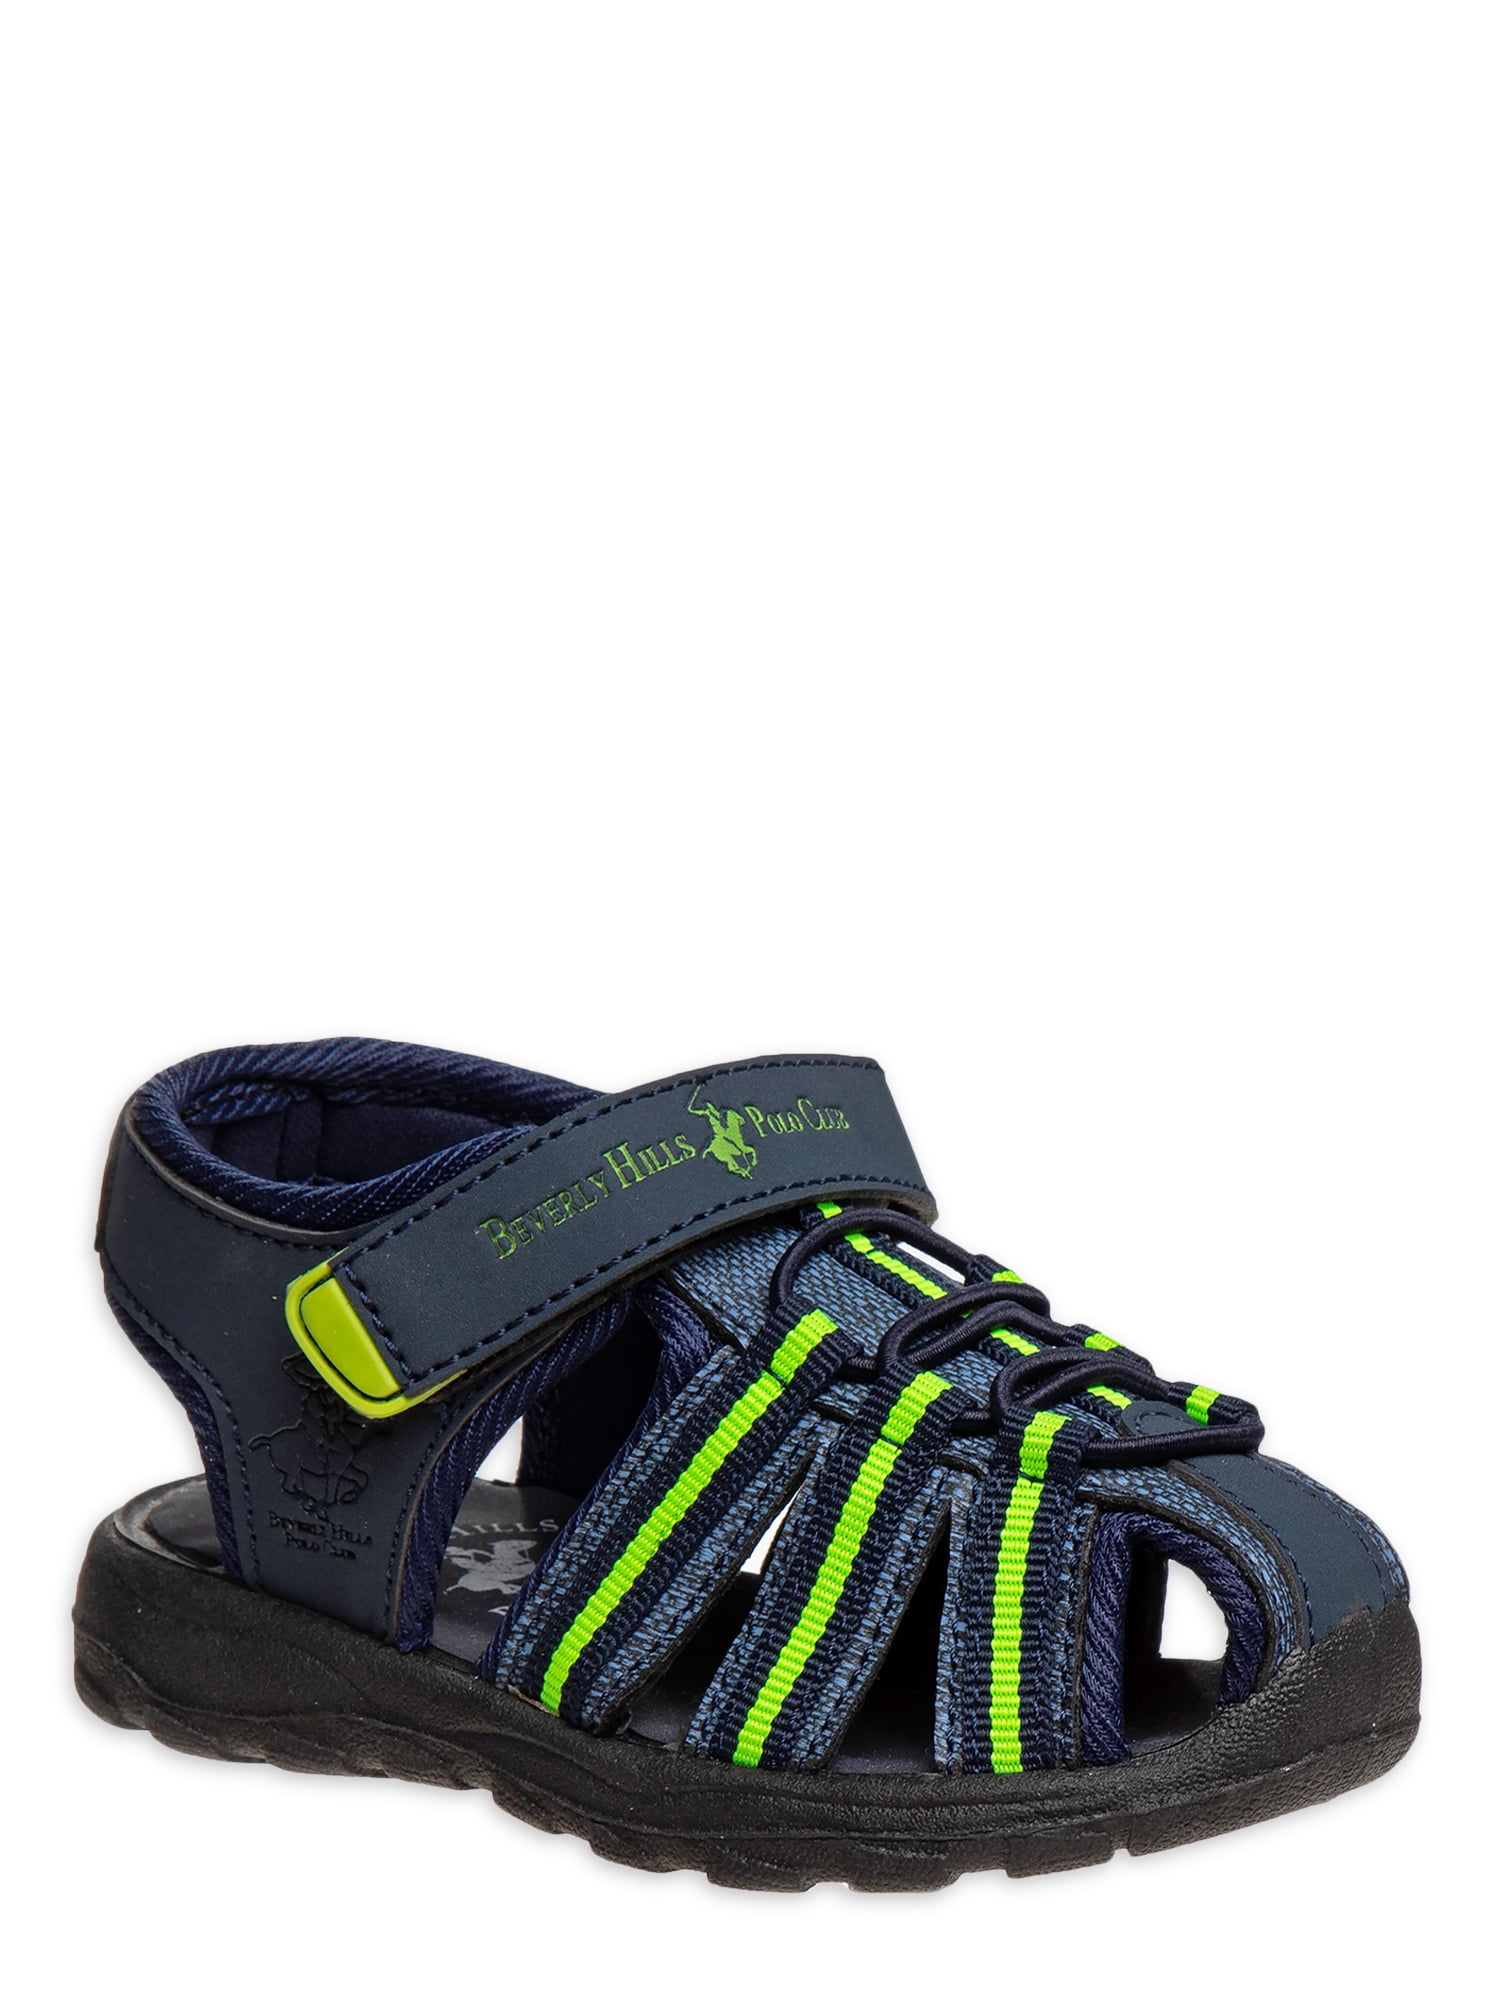 Chatterbox Boys Caged Toe Sandals Beach Holiday Faux Leather Shoes Size 4 Infant 